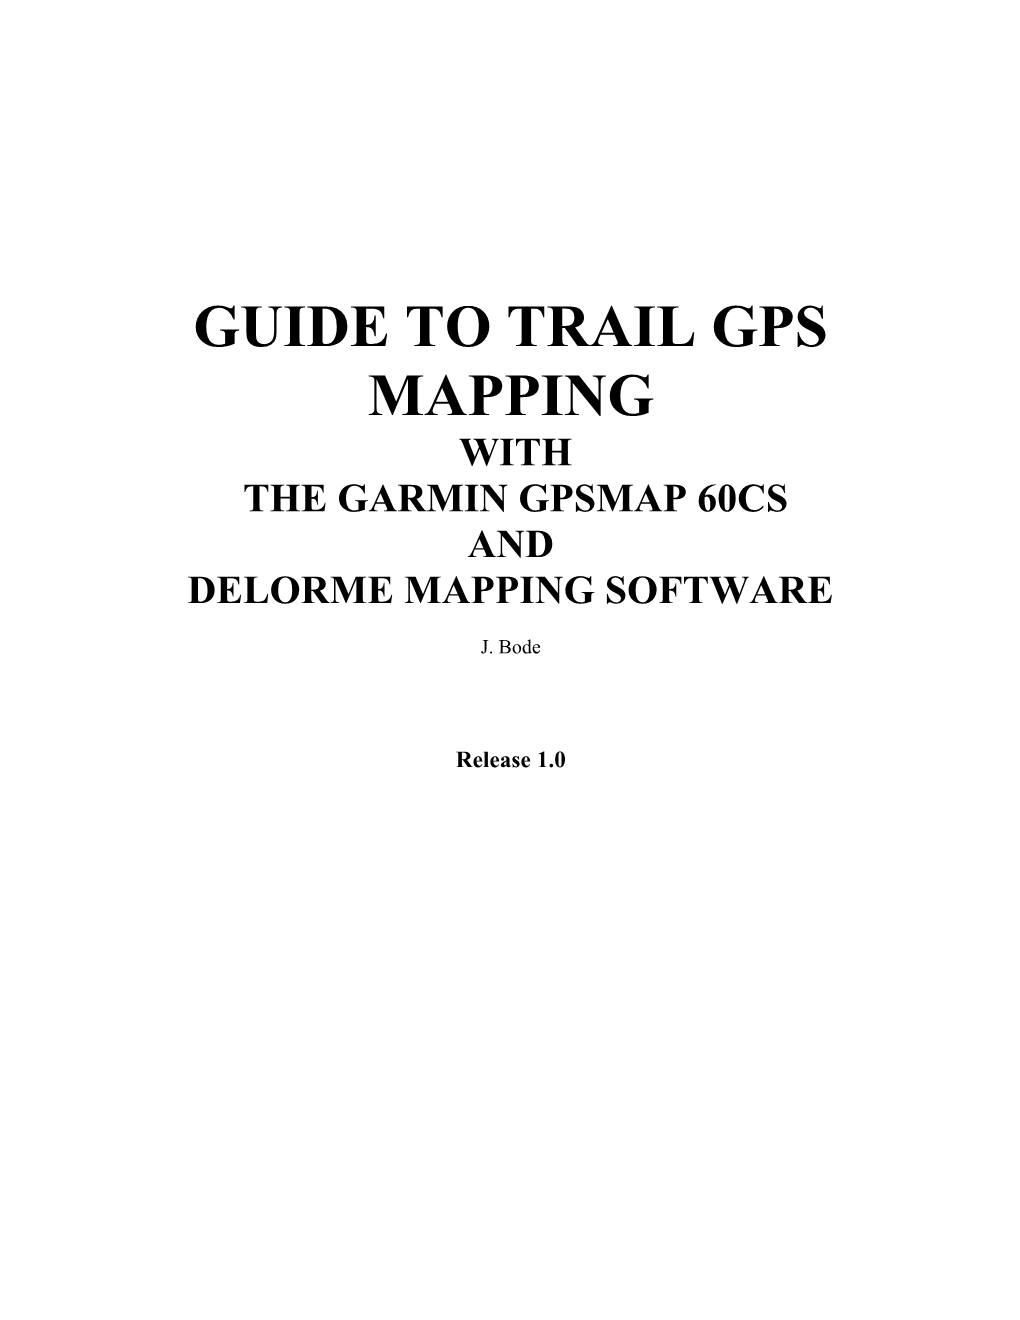 Guide to Trail GPS Mapping with the Garmin GPSMAP 60Csand Delorme Mapping Software